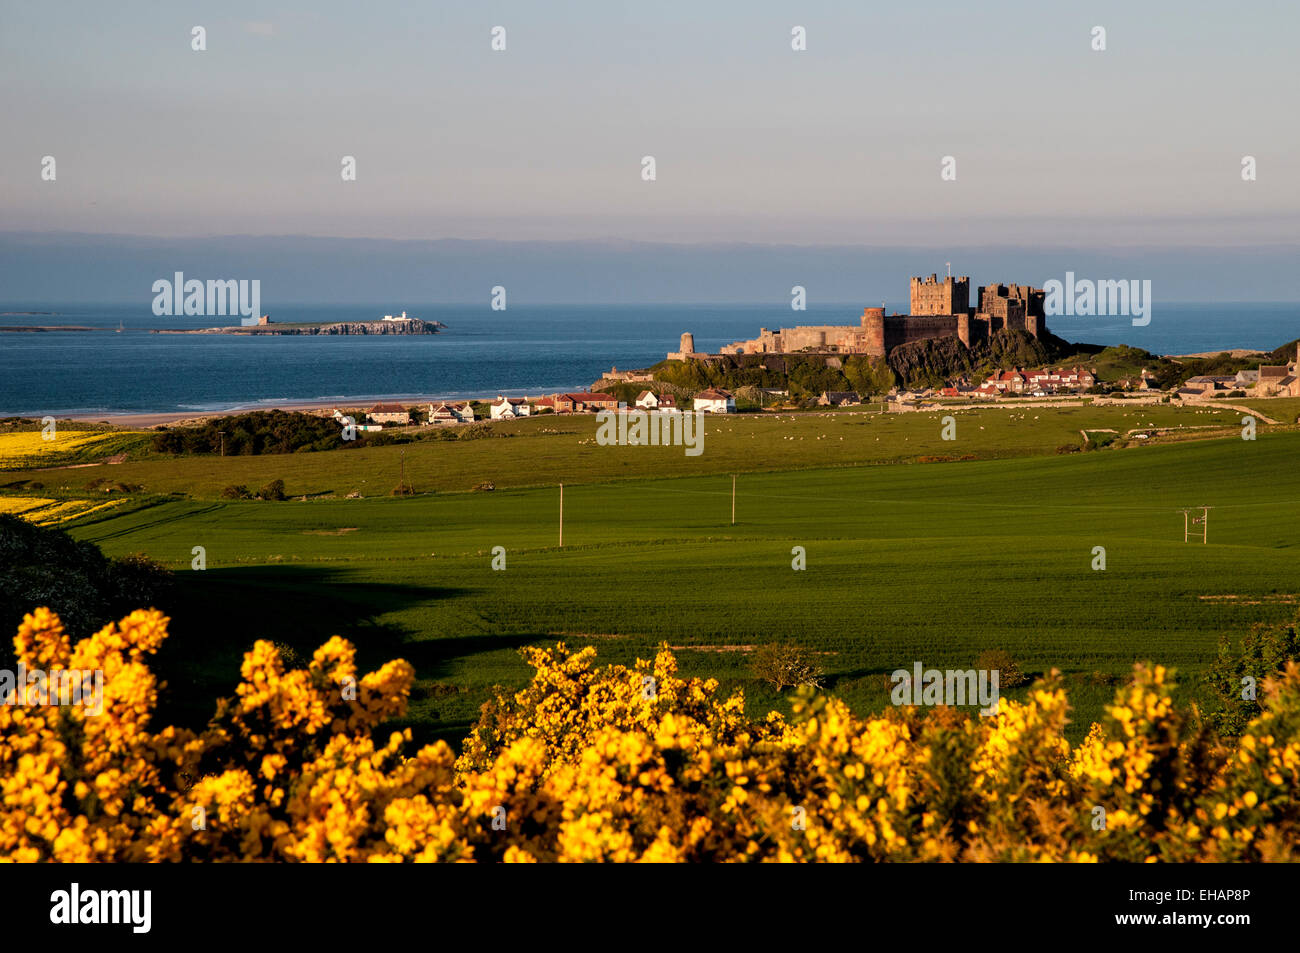 Bamburgh Castle, with the Farne Islands behind, dominating the village of Bamburgh in Northumberland. June. Stock Photo